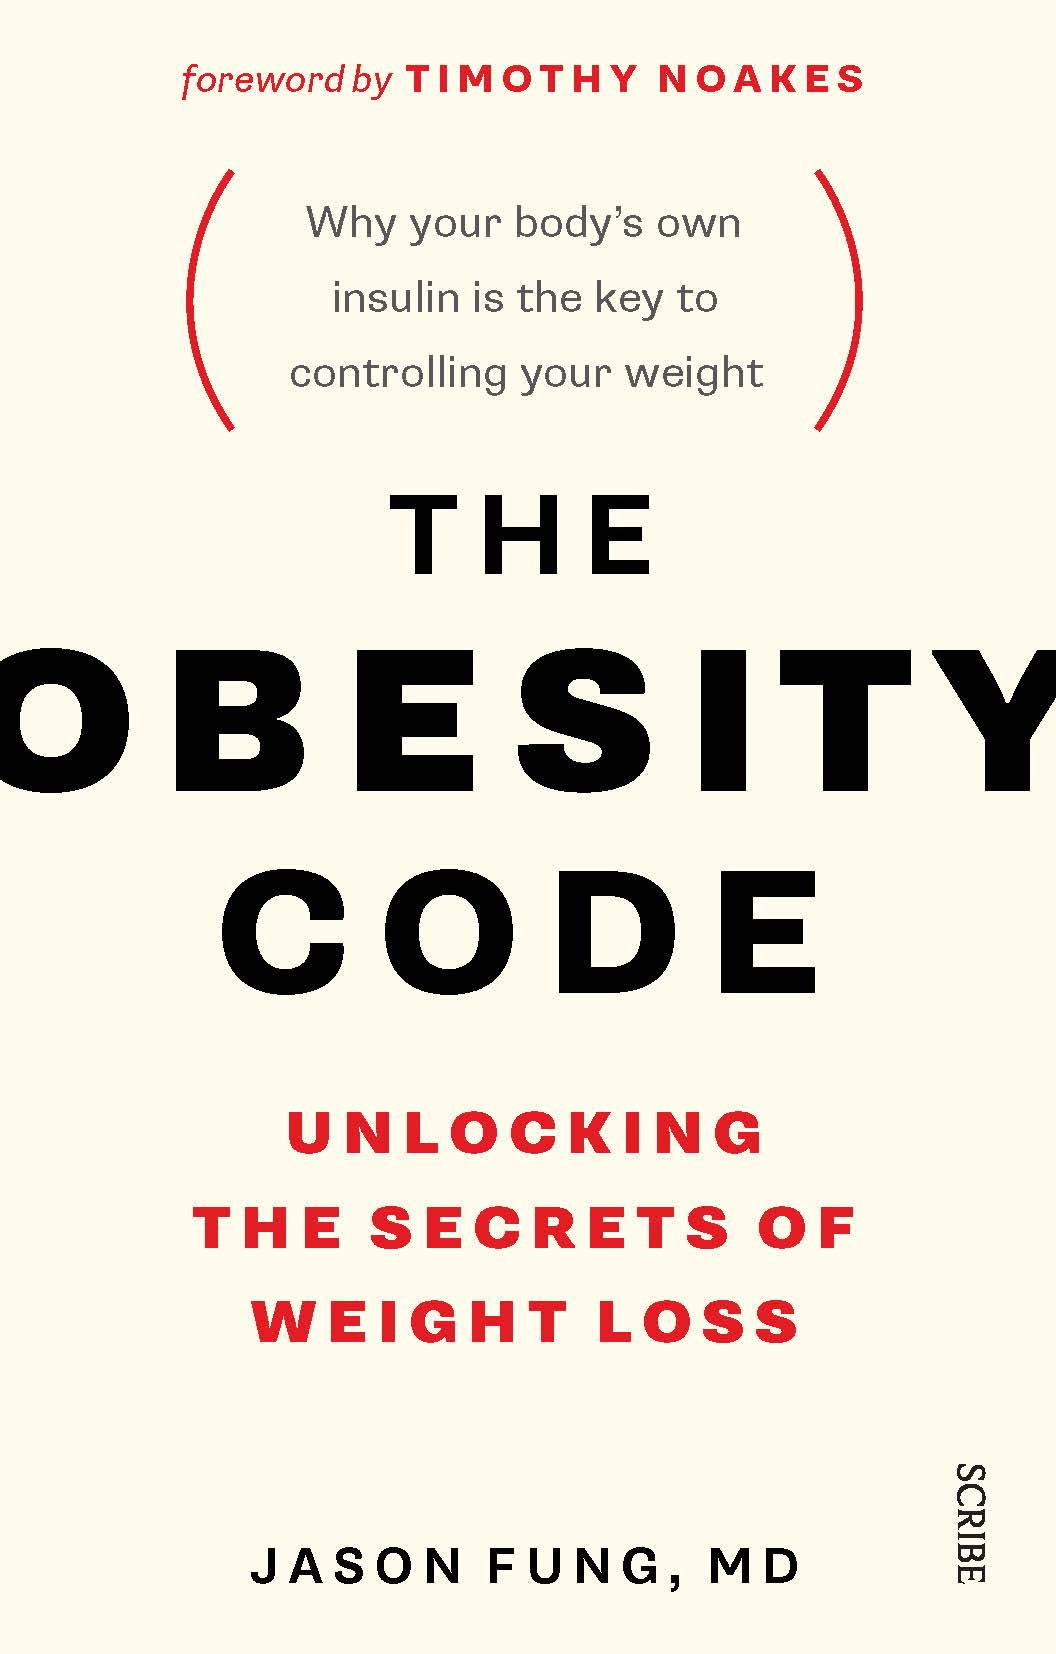 the obesity code reviews